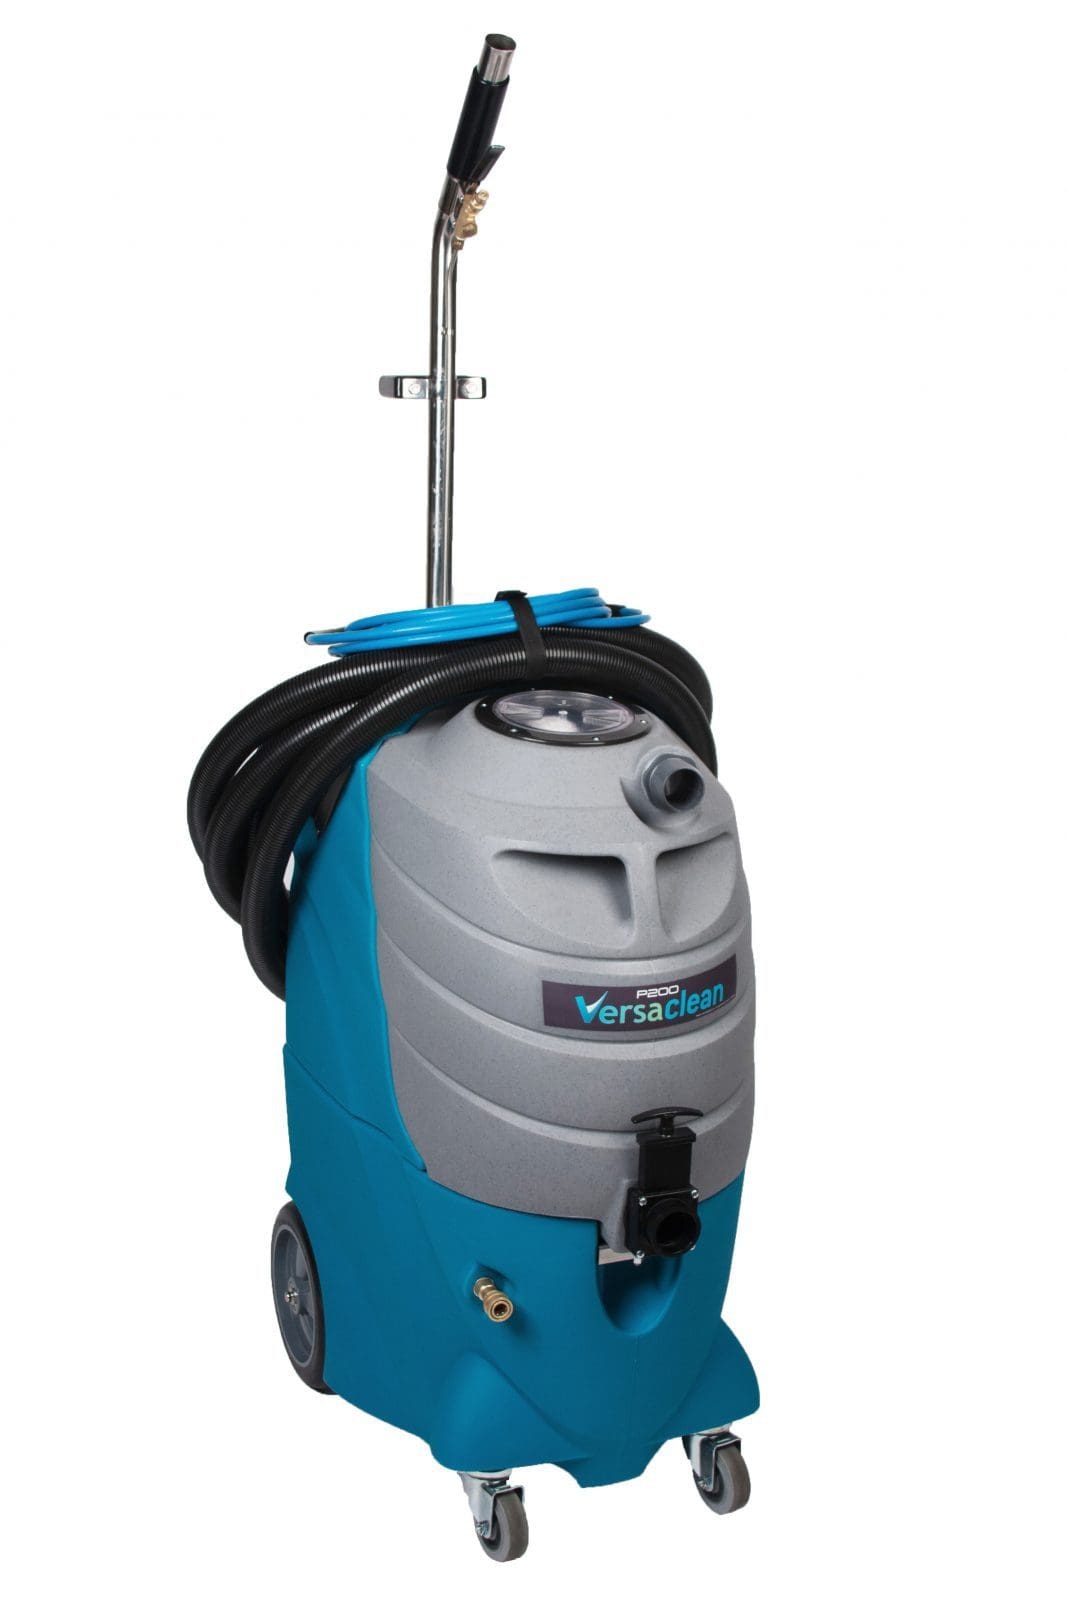 Rotovac DFI-5936-WH Carpet Cleaning Extractor for sale online 